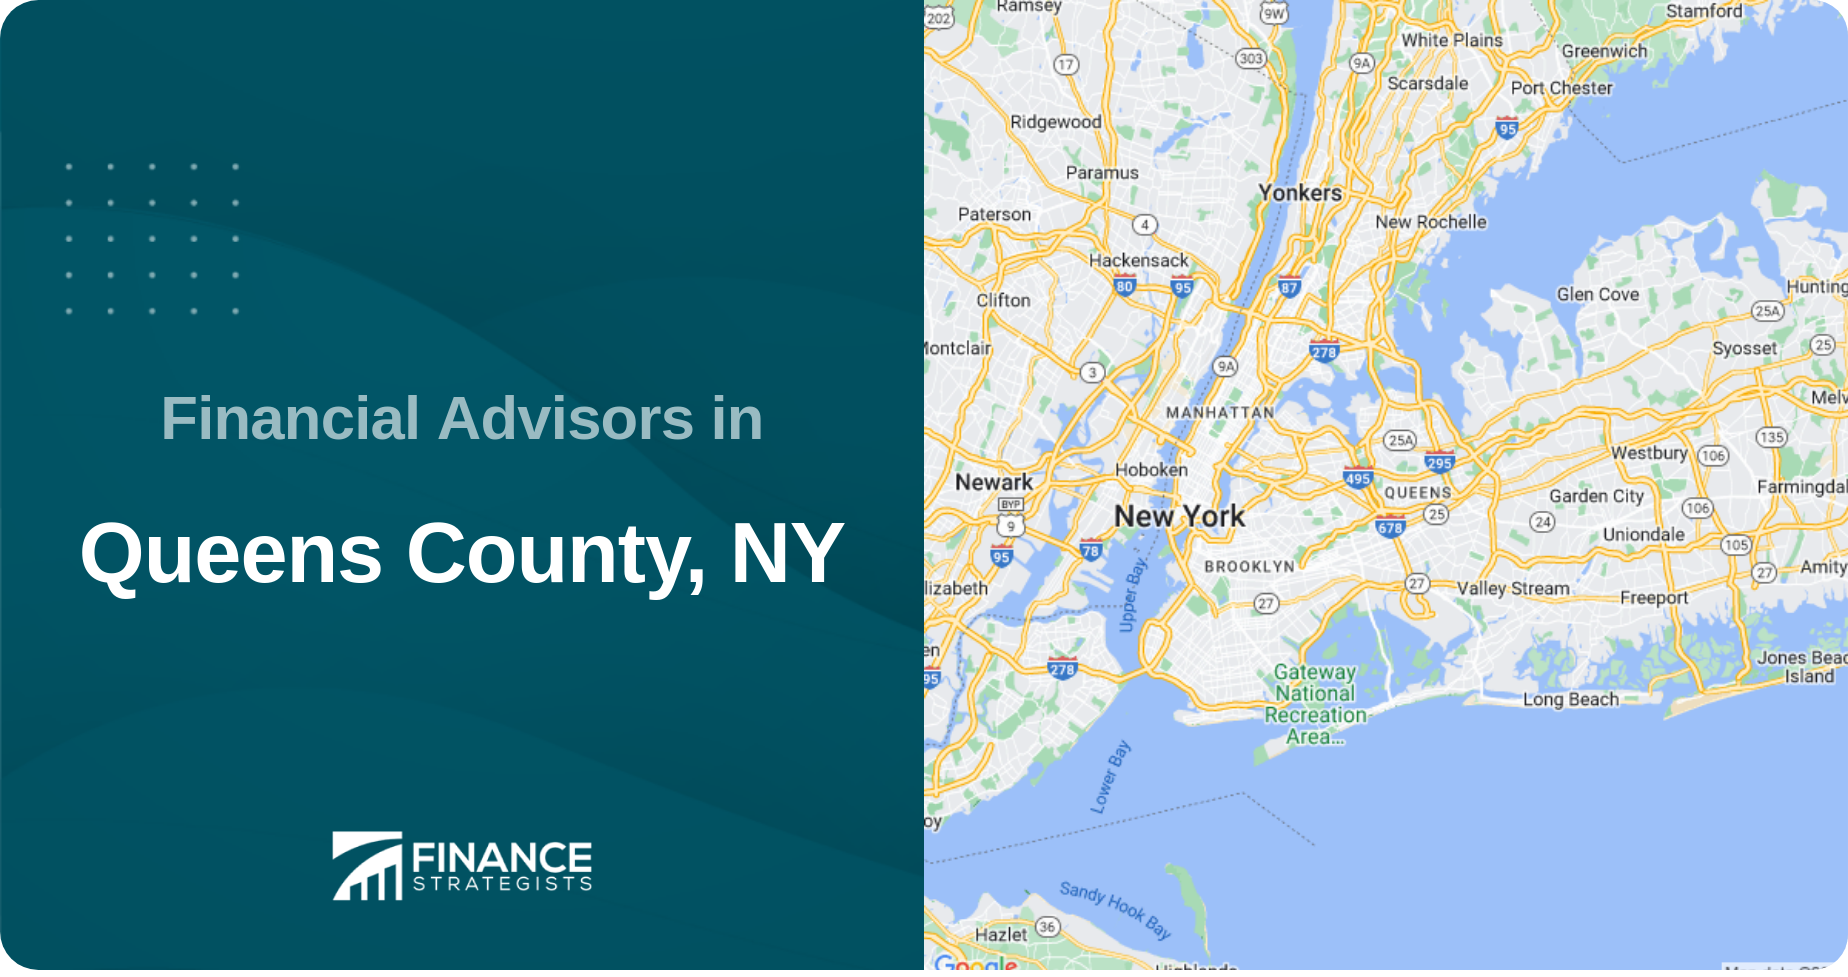 Financial Advisors in Queens County, NY